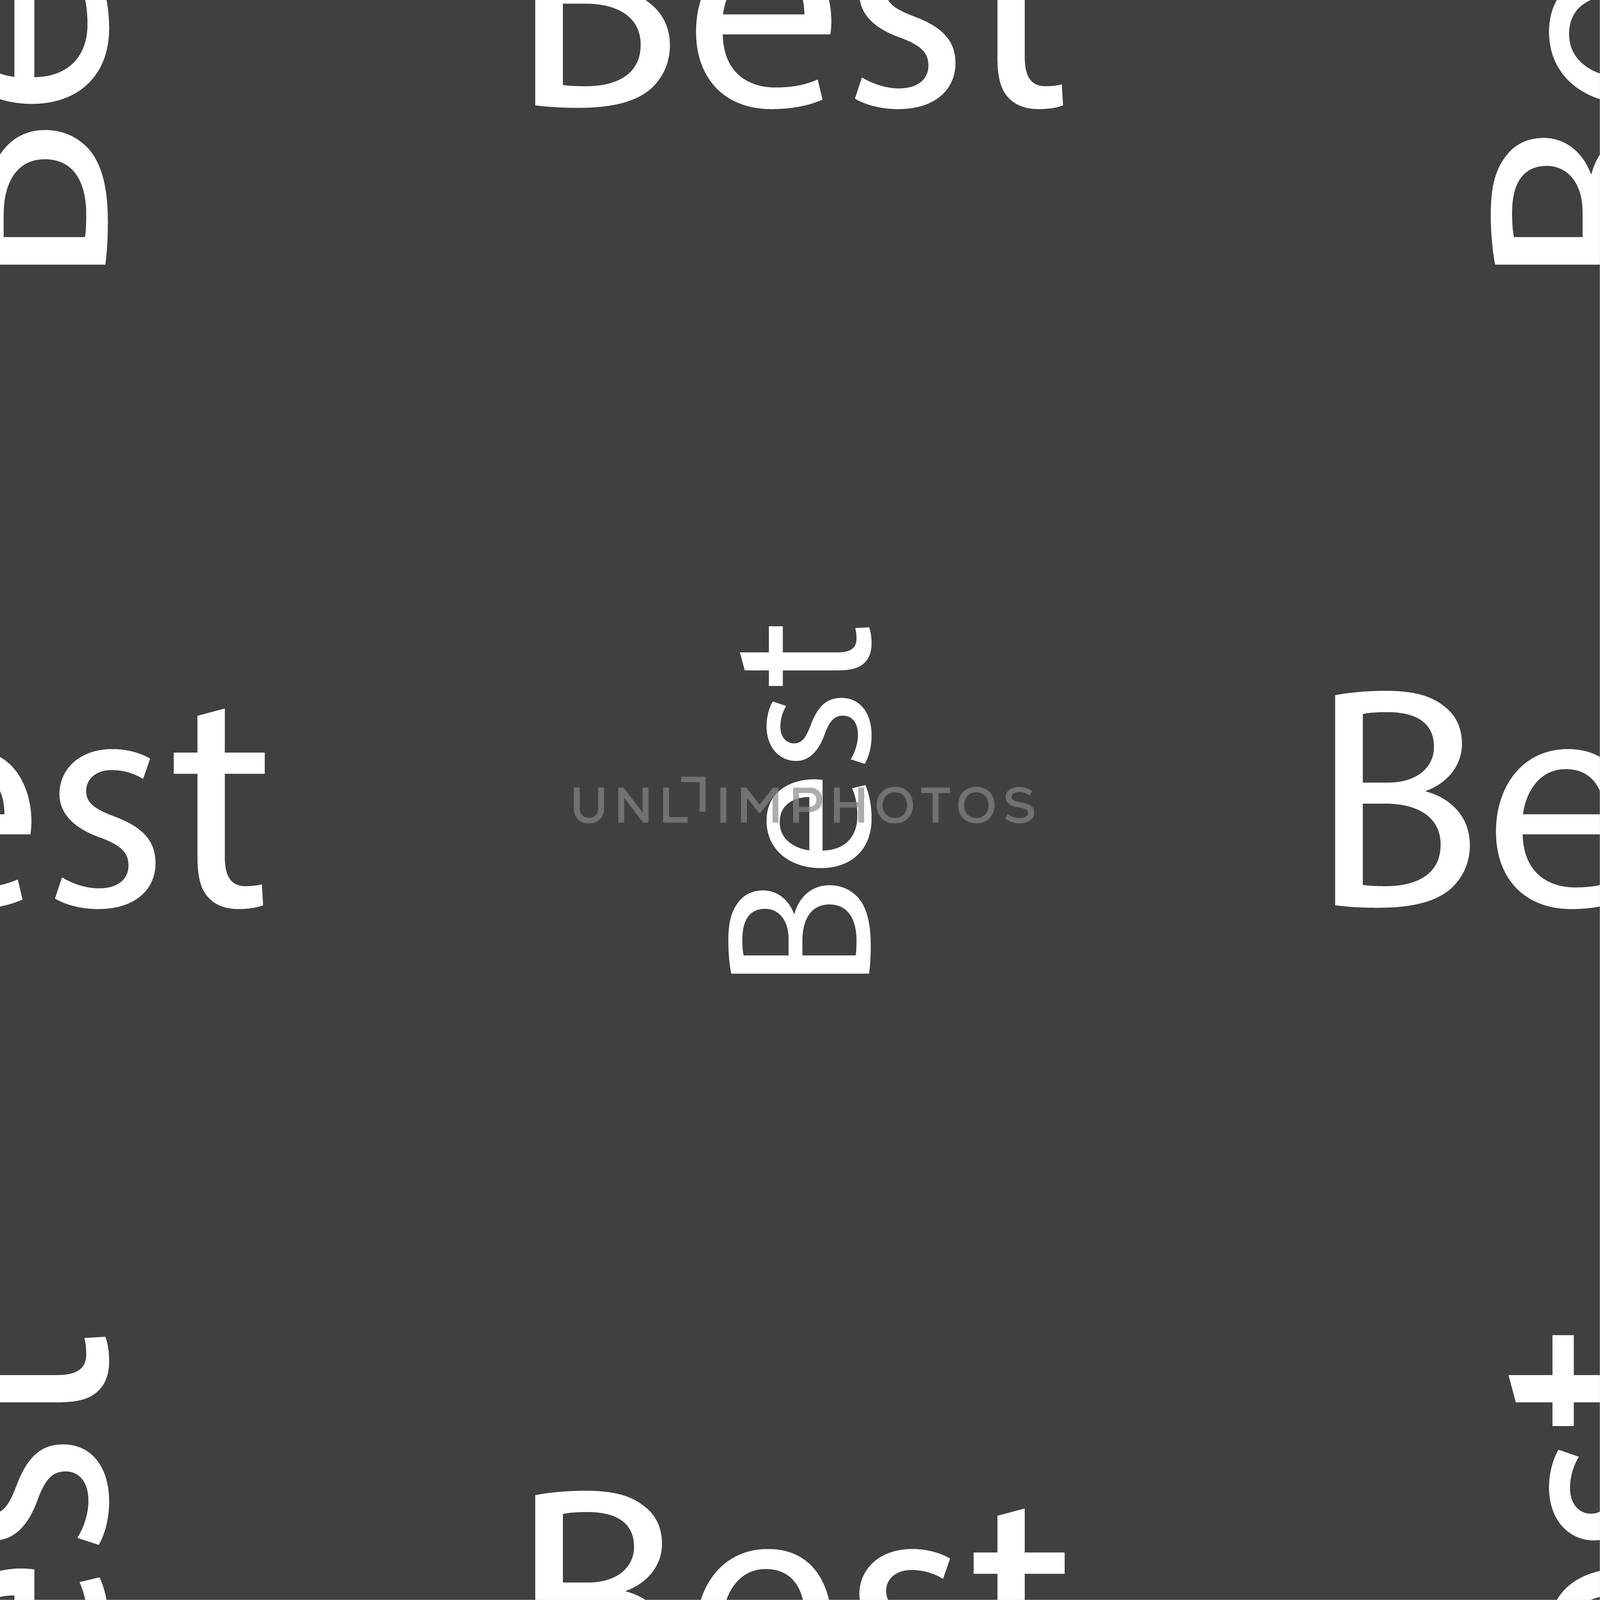 Best seller sign icon. Best-seller award symbol. Seamless pattern on a gray background.  by serhii_lohvyniuk